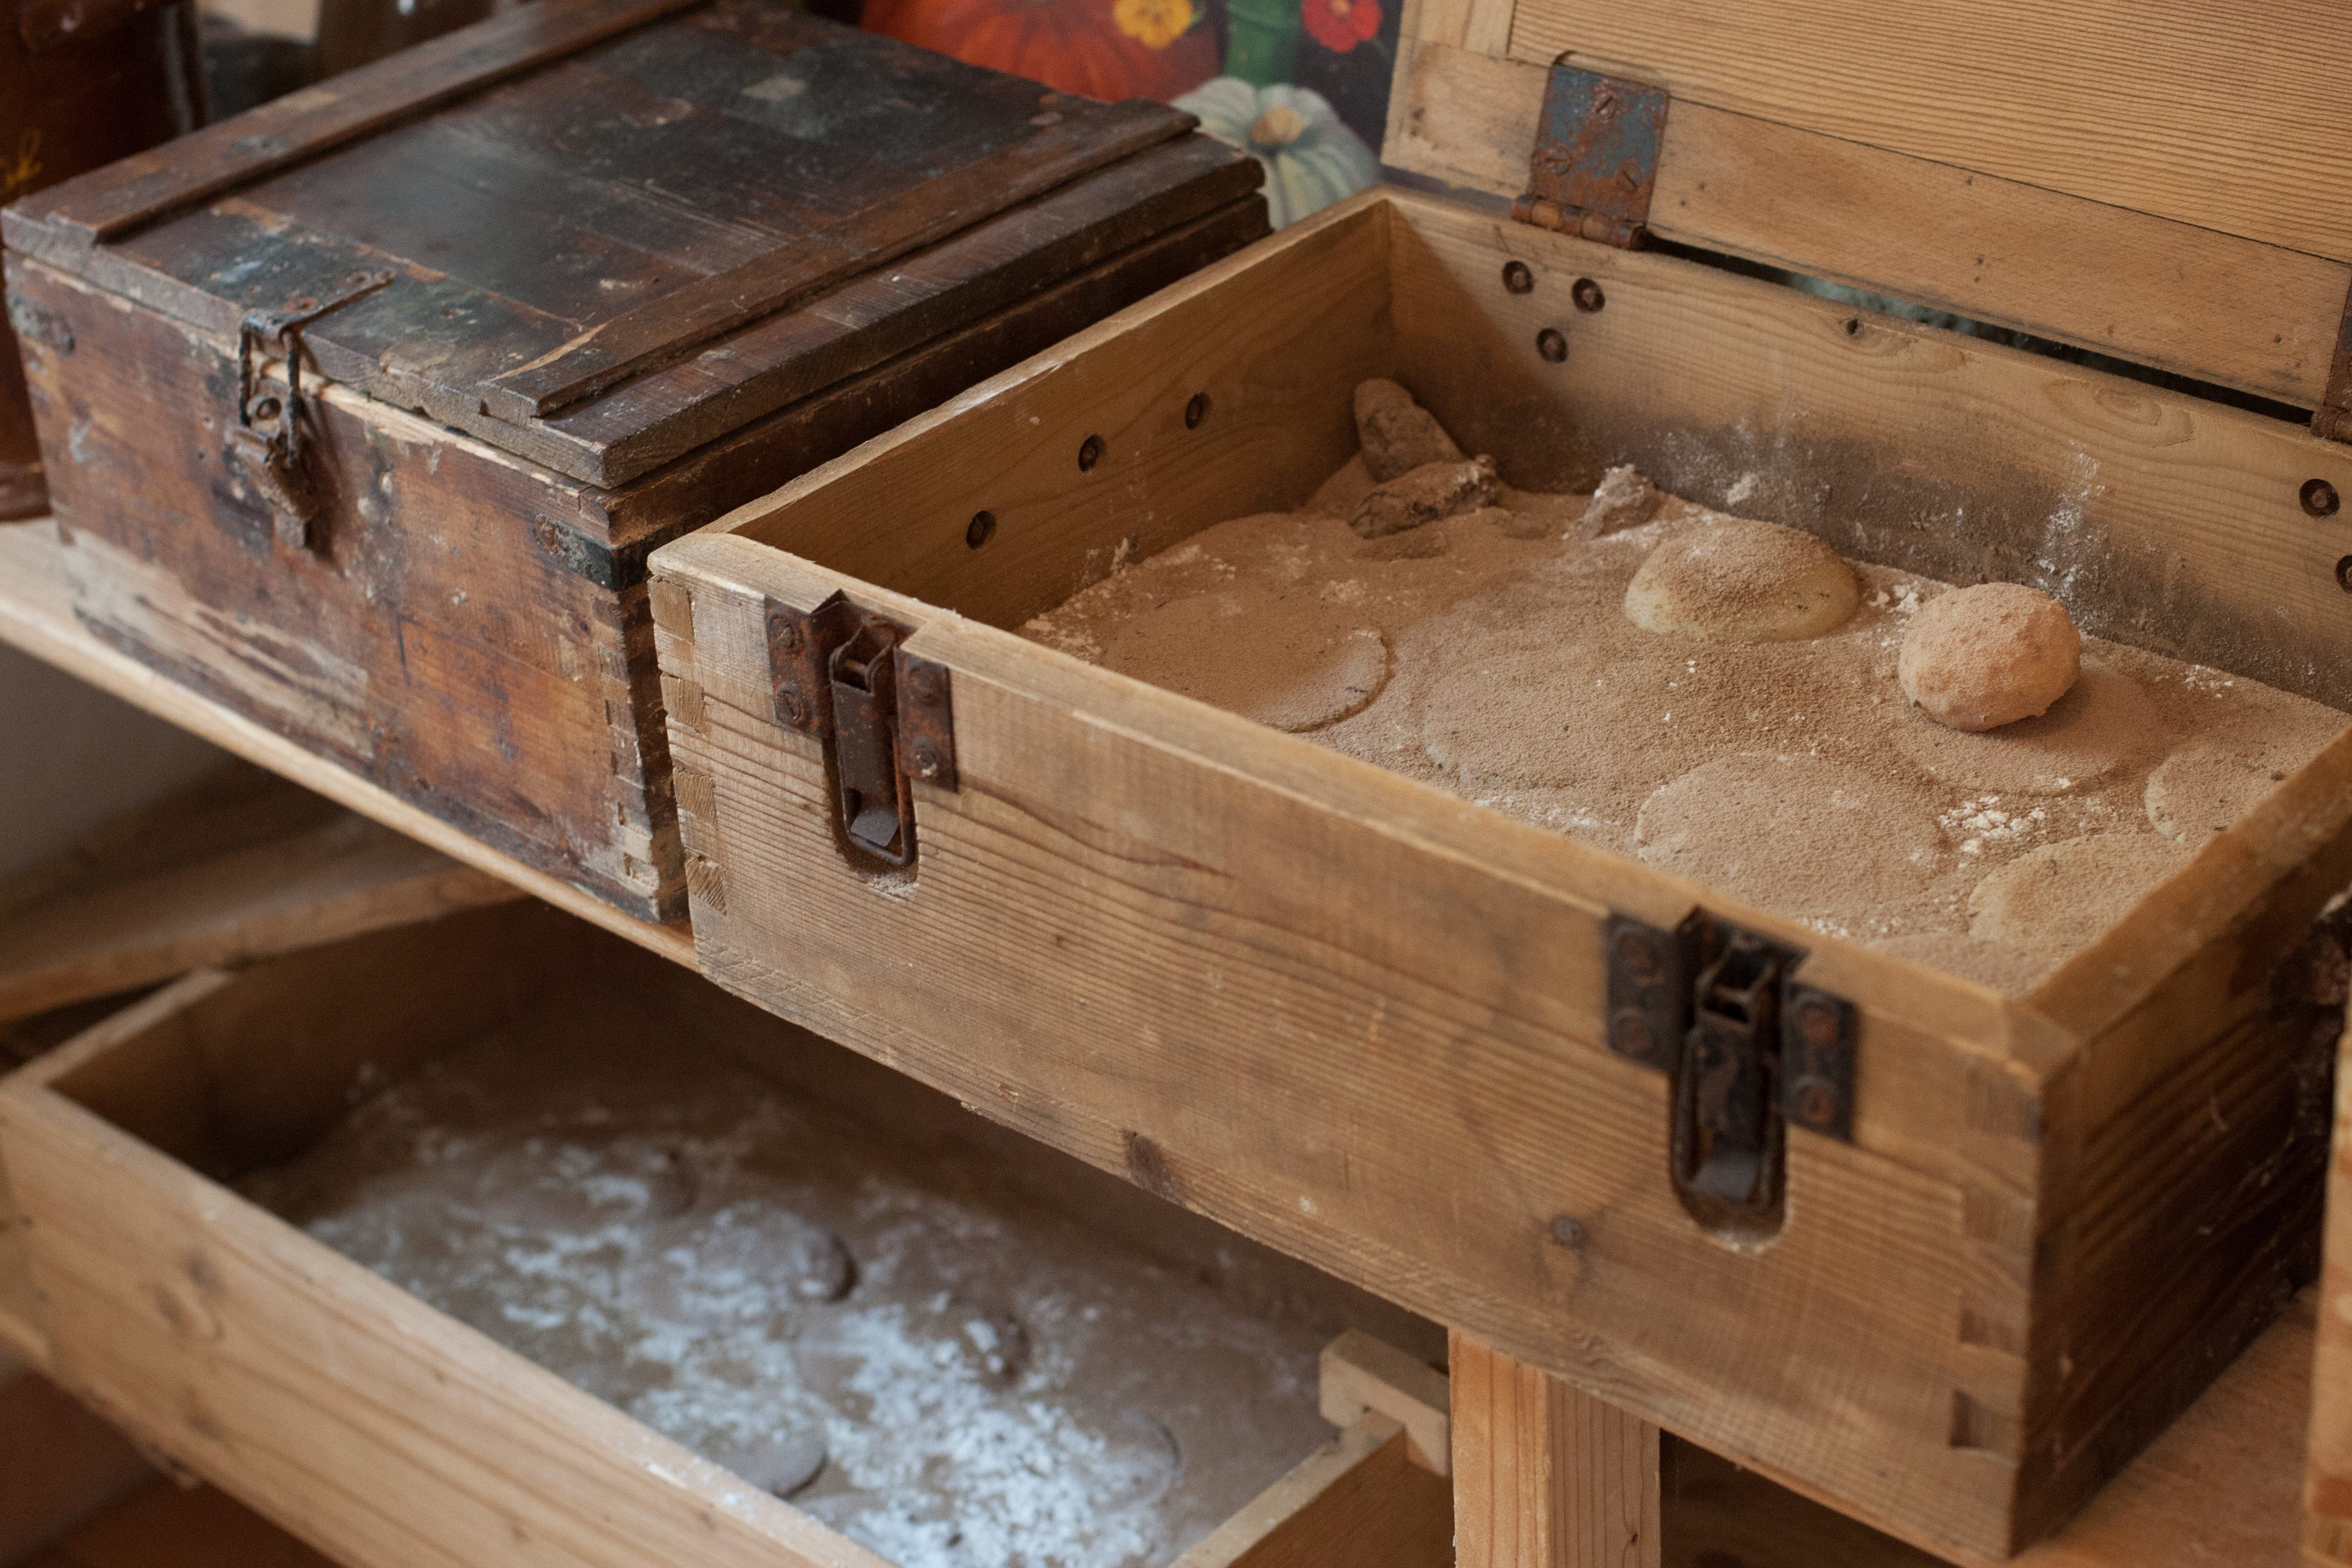 The wooden boxes where the mites work their magic are kept dark, cool, and humid.